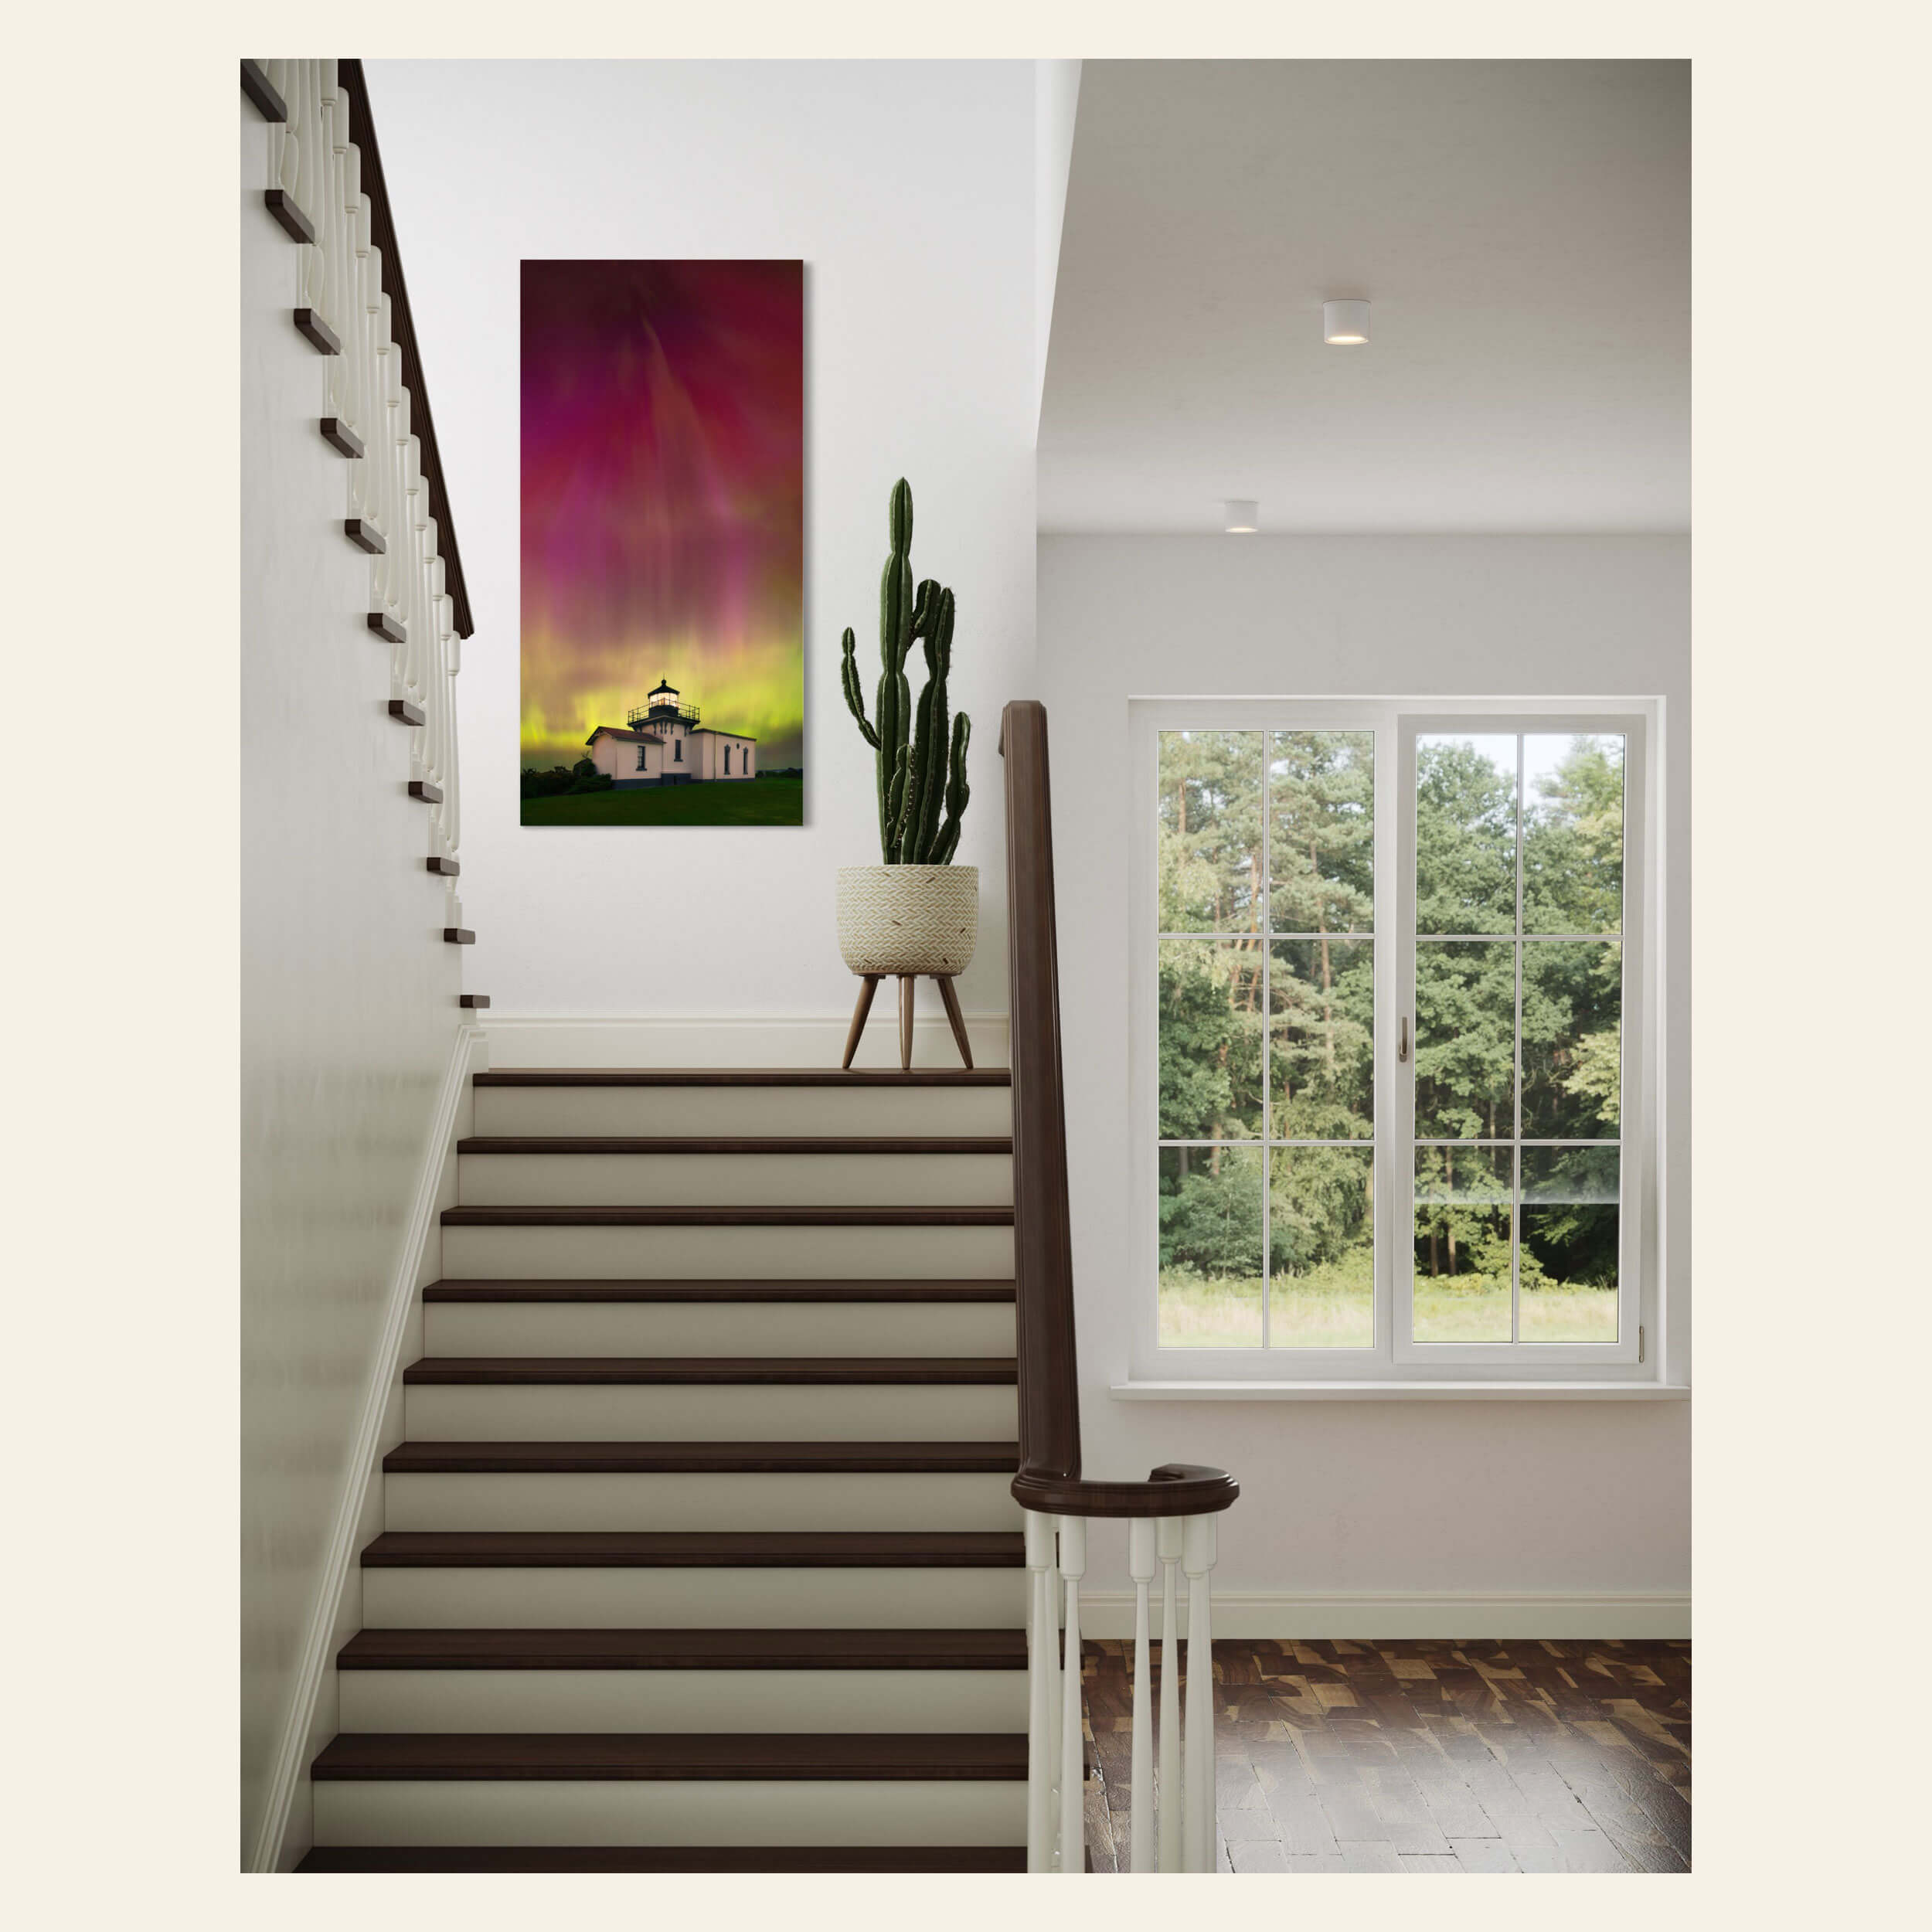 A Washington Northern Lights photography print hangs in a staircase.